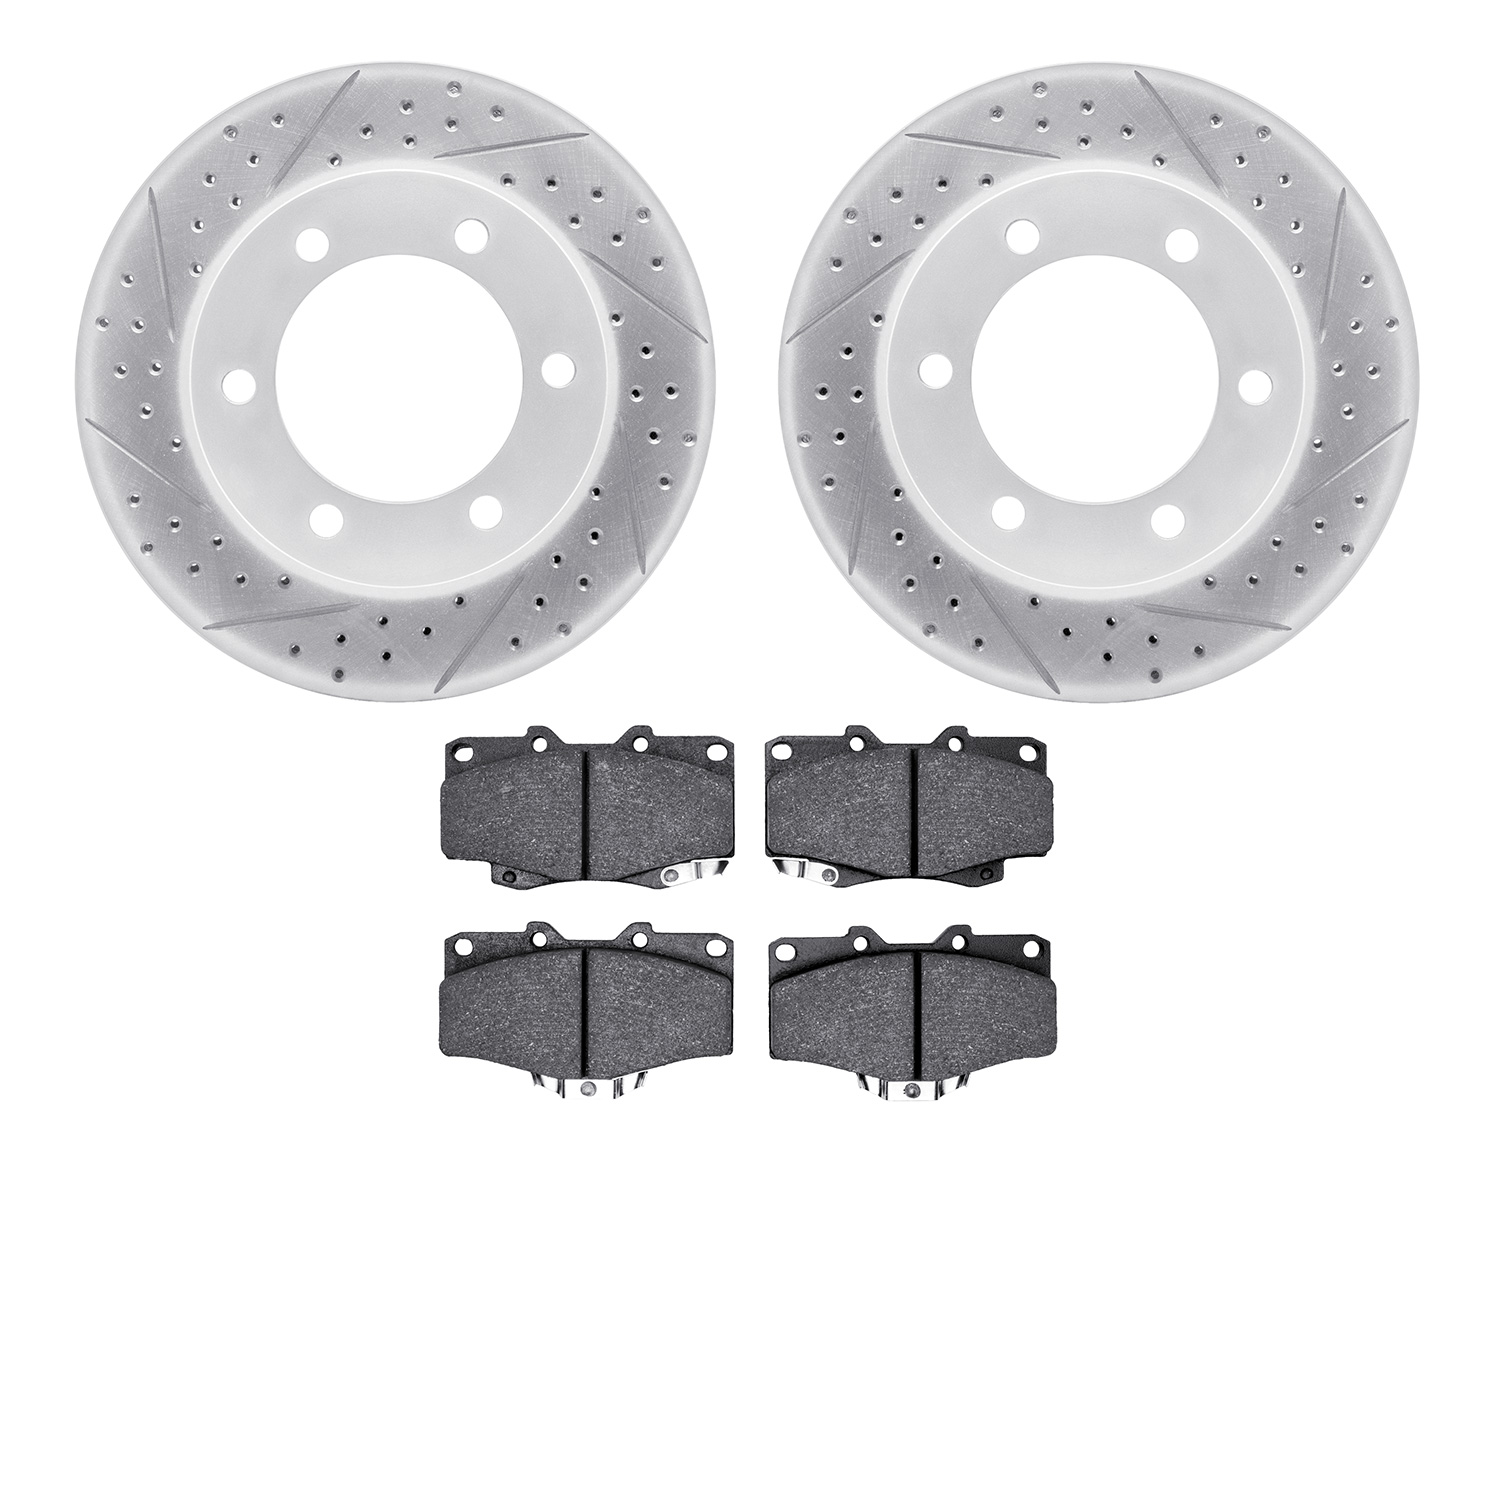 2502-76076 Geoperformance Drilled/Slotted Rotors w/5000 Advanced Brake Pads Kit, 1995-2004 Lexus/Toyota/Scion, Position: Front